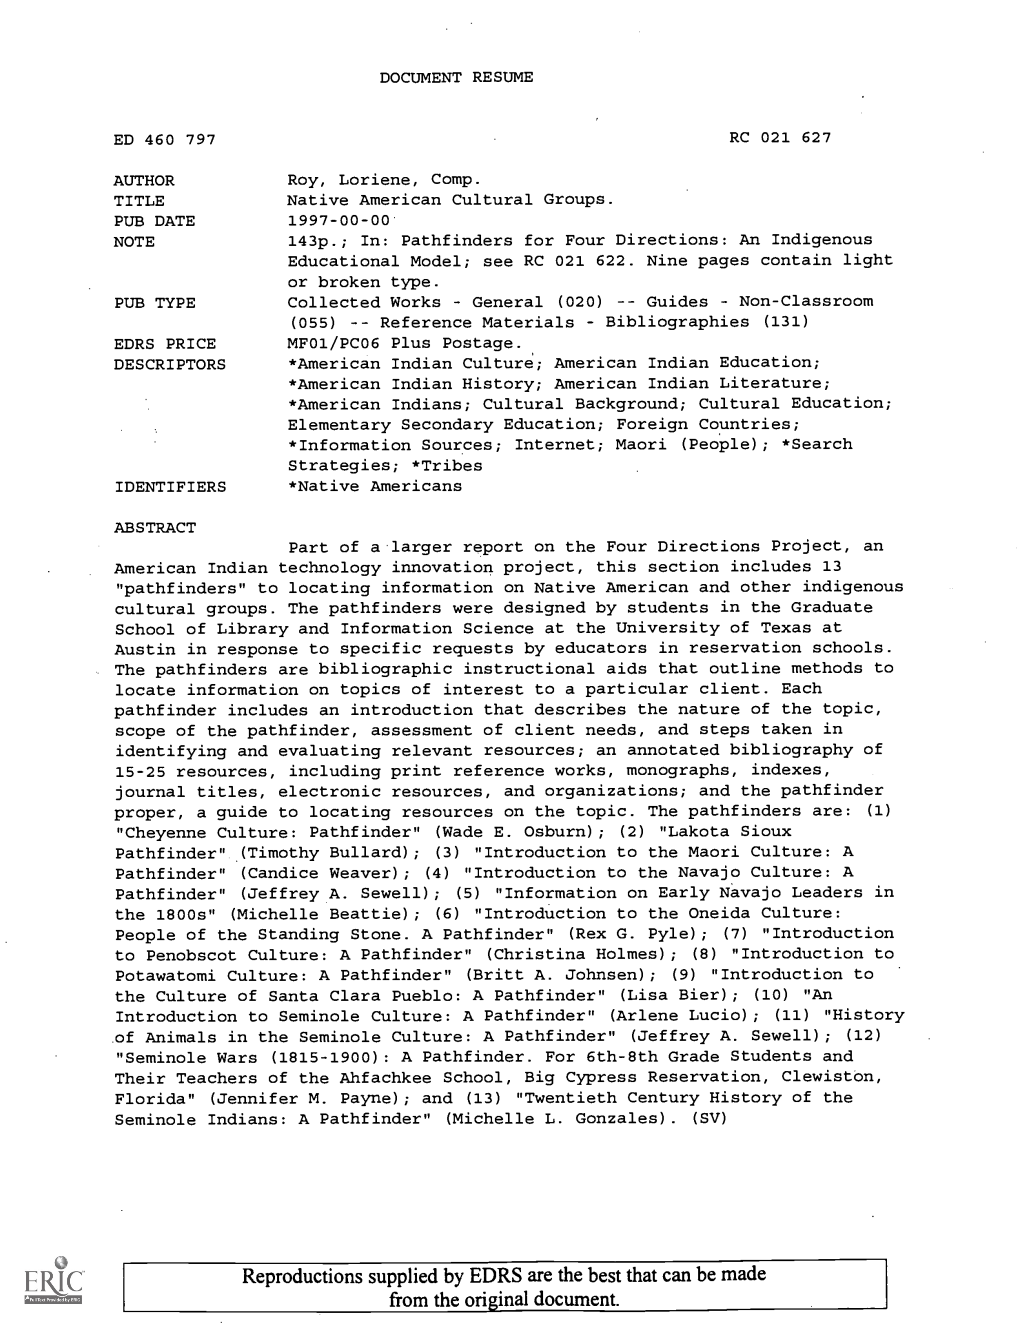 Native American Cultural Groups. PUB DATE 1997-00-00 NOTE 143P.; In: Pathfinders for Four Directions: an Indigenous Educational Model; See RC 021 622